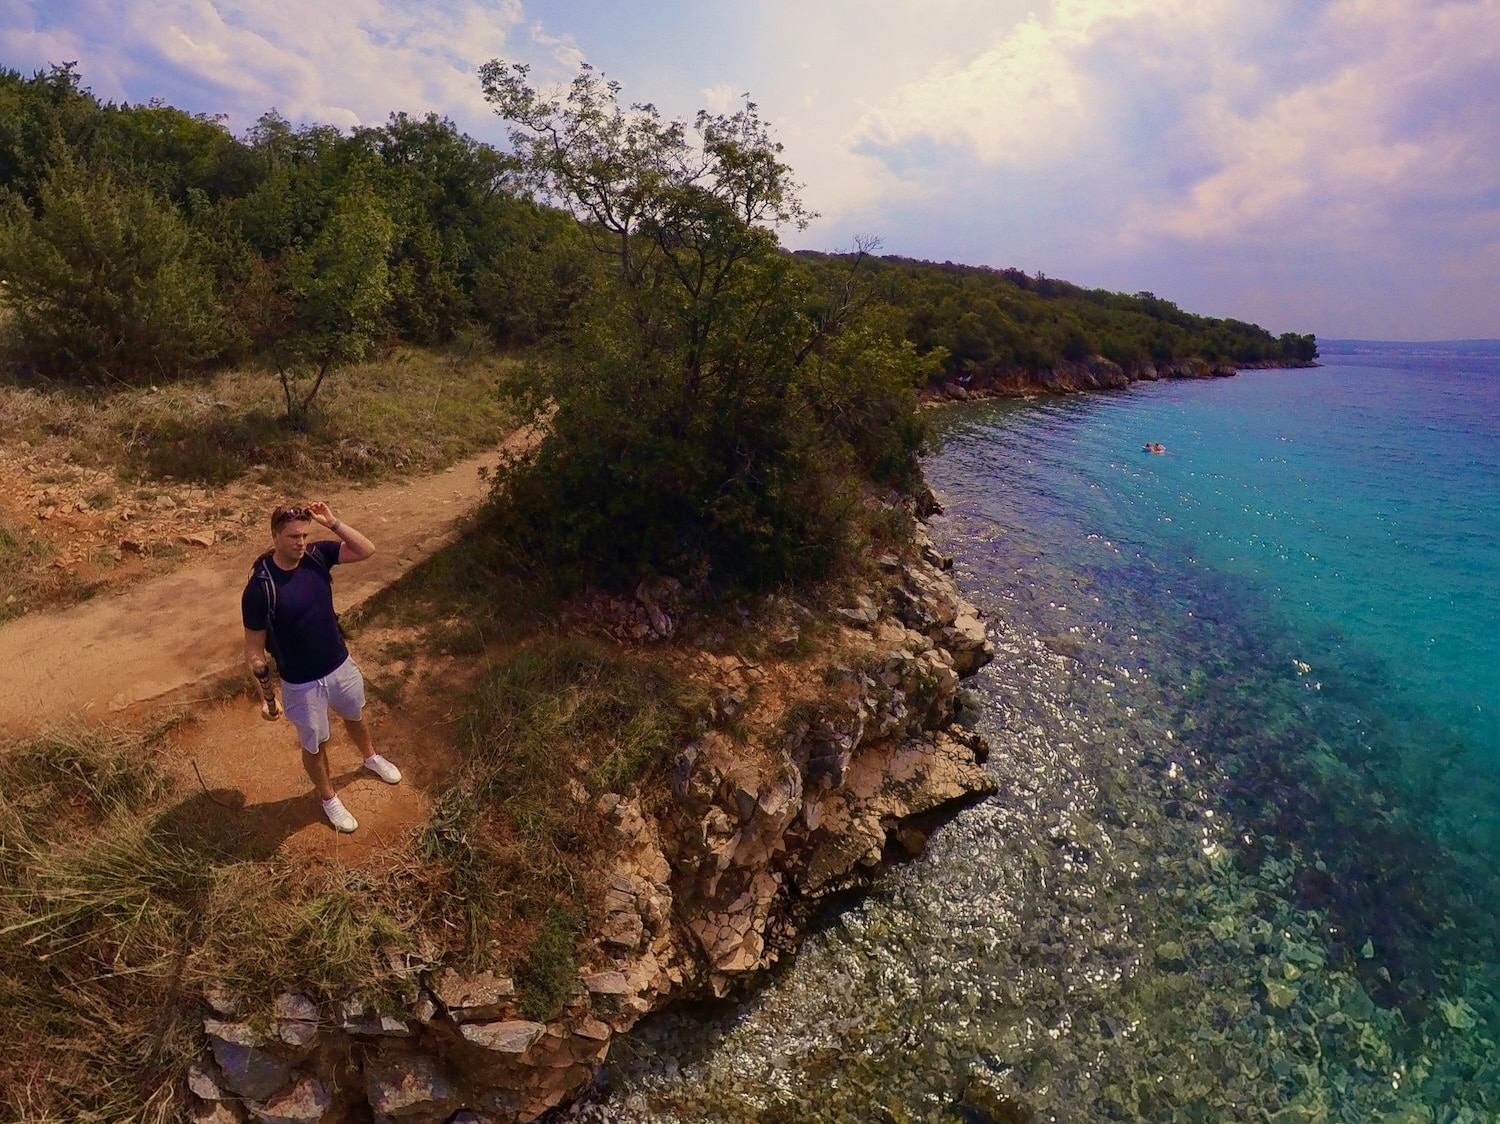 To create shots that look like they were taken by a drone, you need the extra-long 3m selfie stick, which you have to fully extend. Photo: Sascha Tegtmeyer